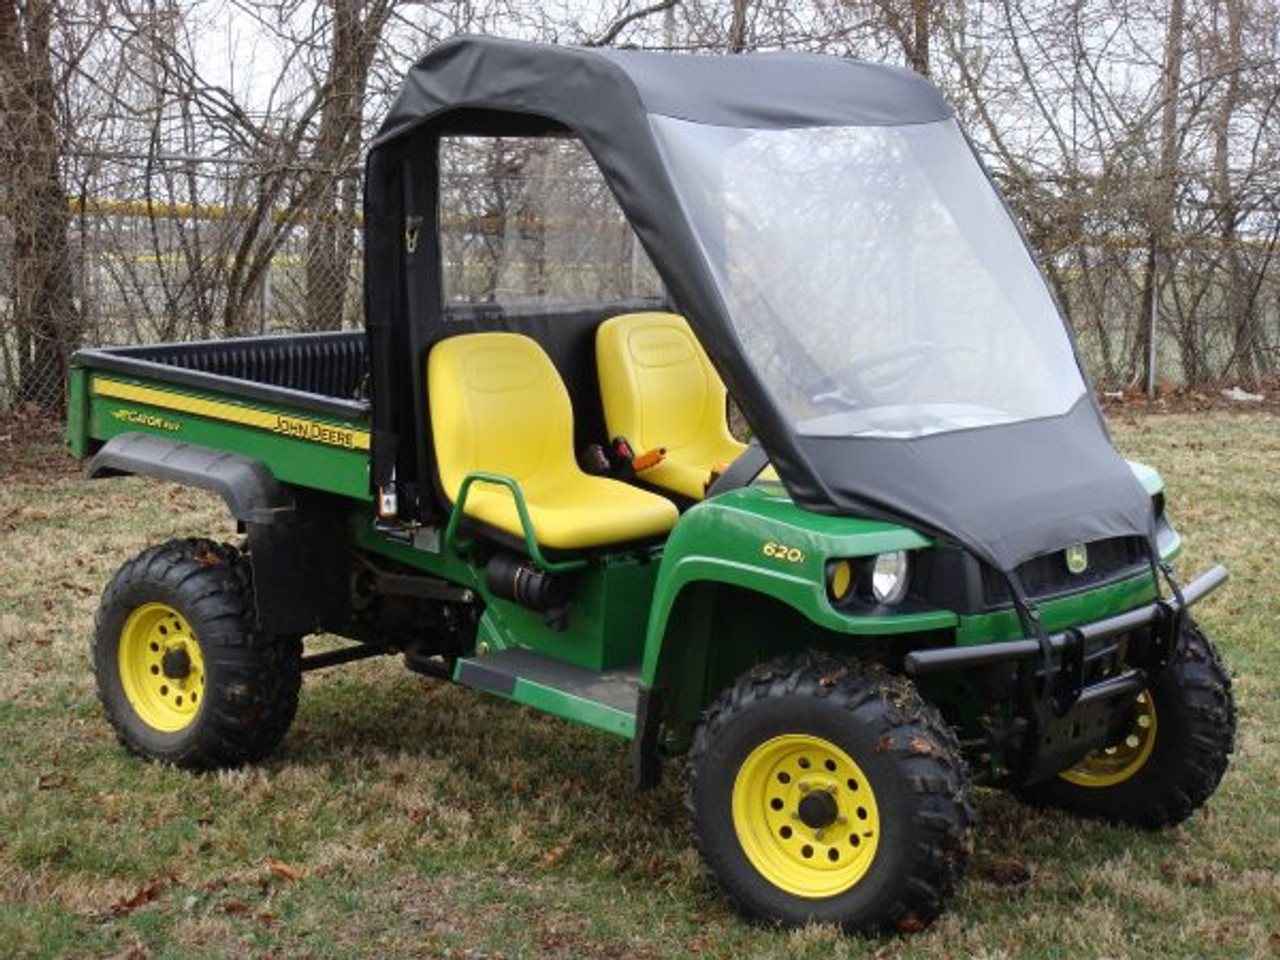 3 Star side x side John Deere HPX/XUV vinyl windshield, top and rear window side and front angle view